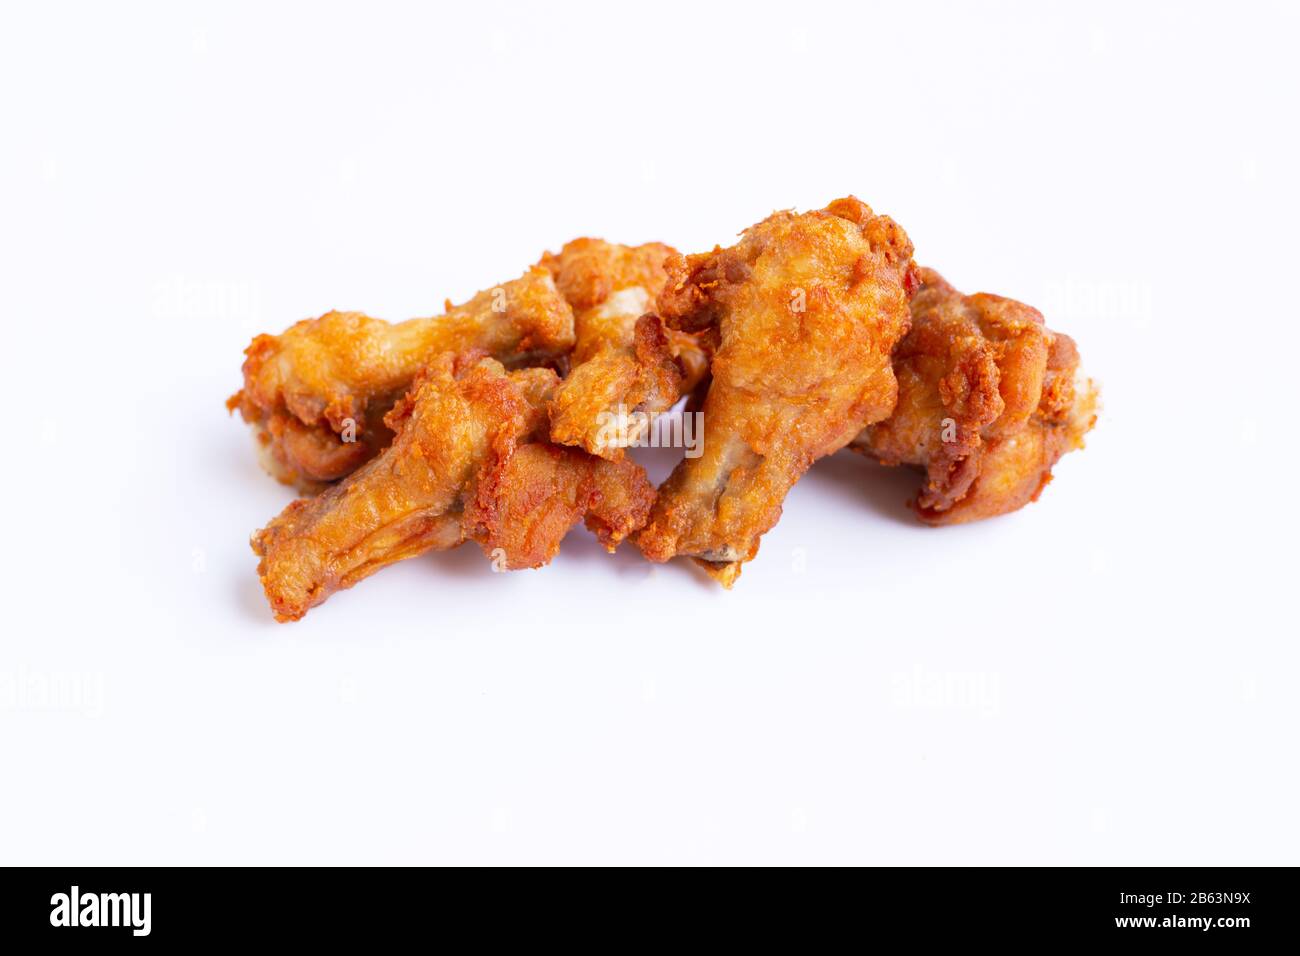 Fried chicken on white background. Copy space Stock Photo